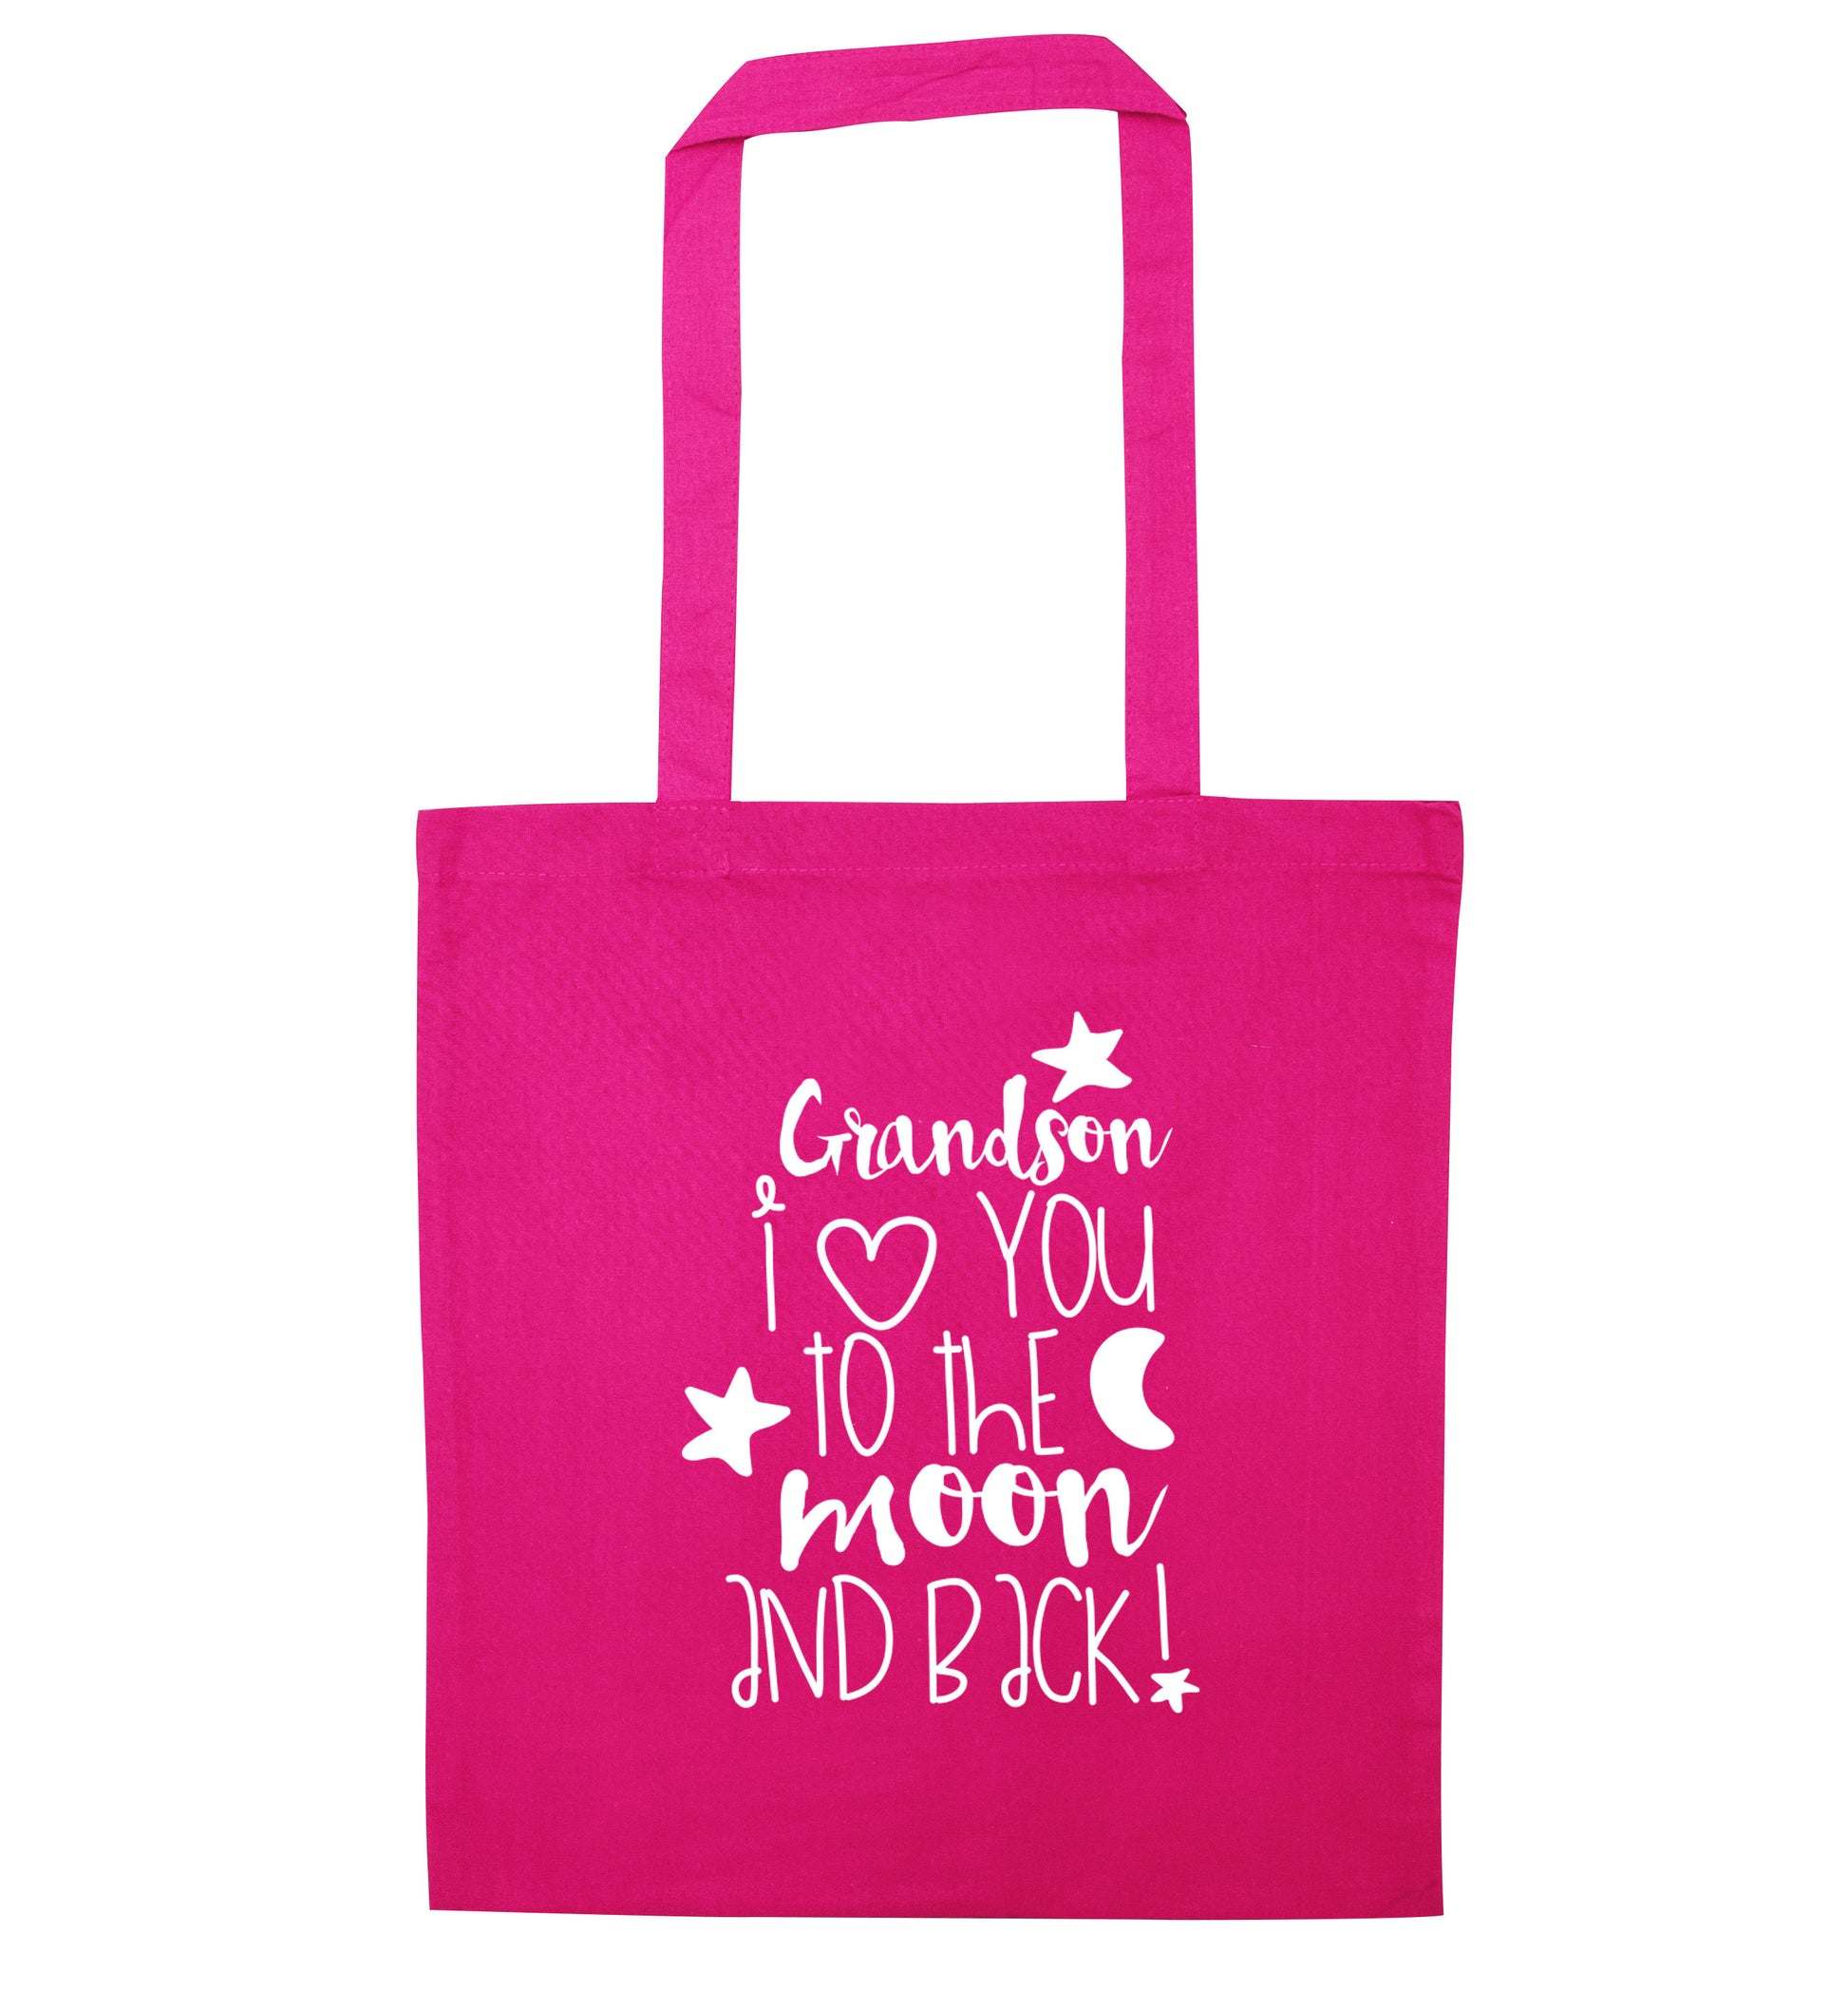 Grandson I love you to the moon and back pink tote bag